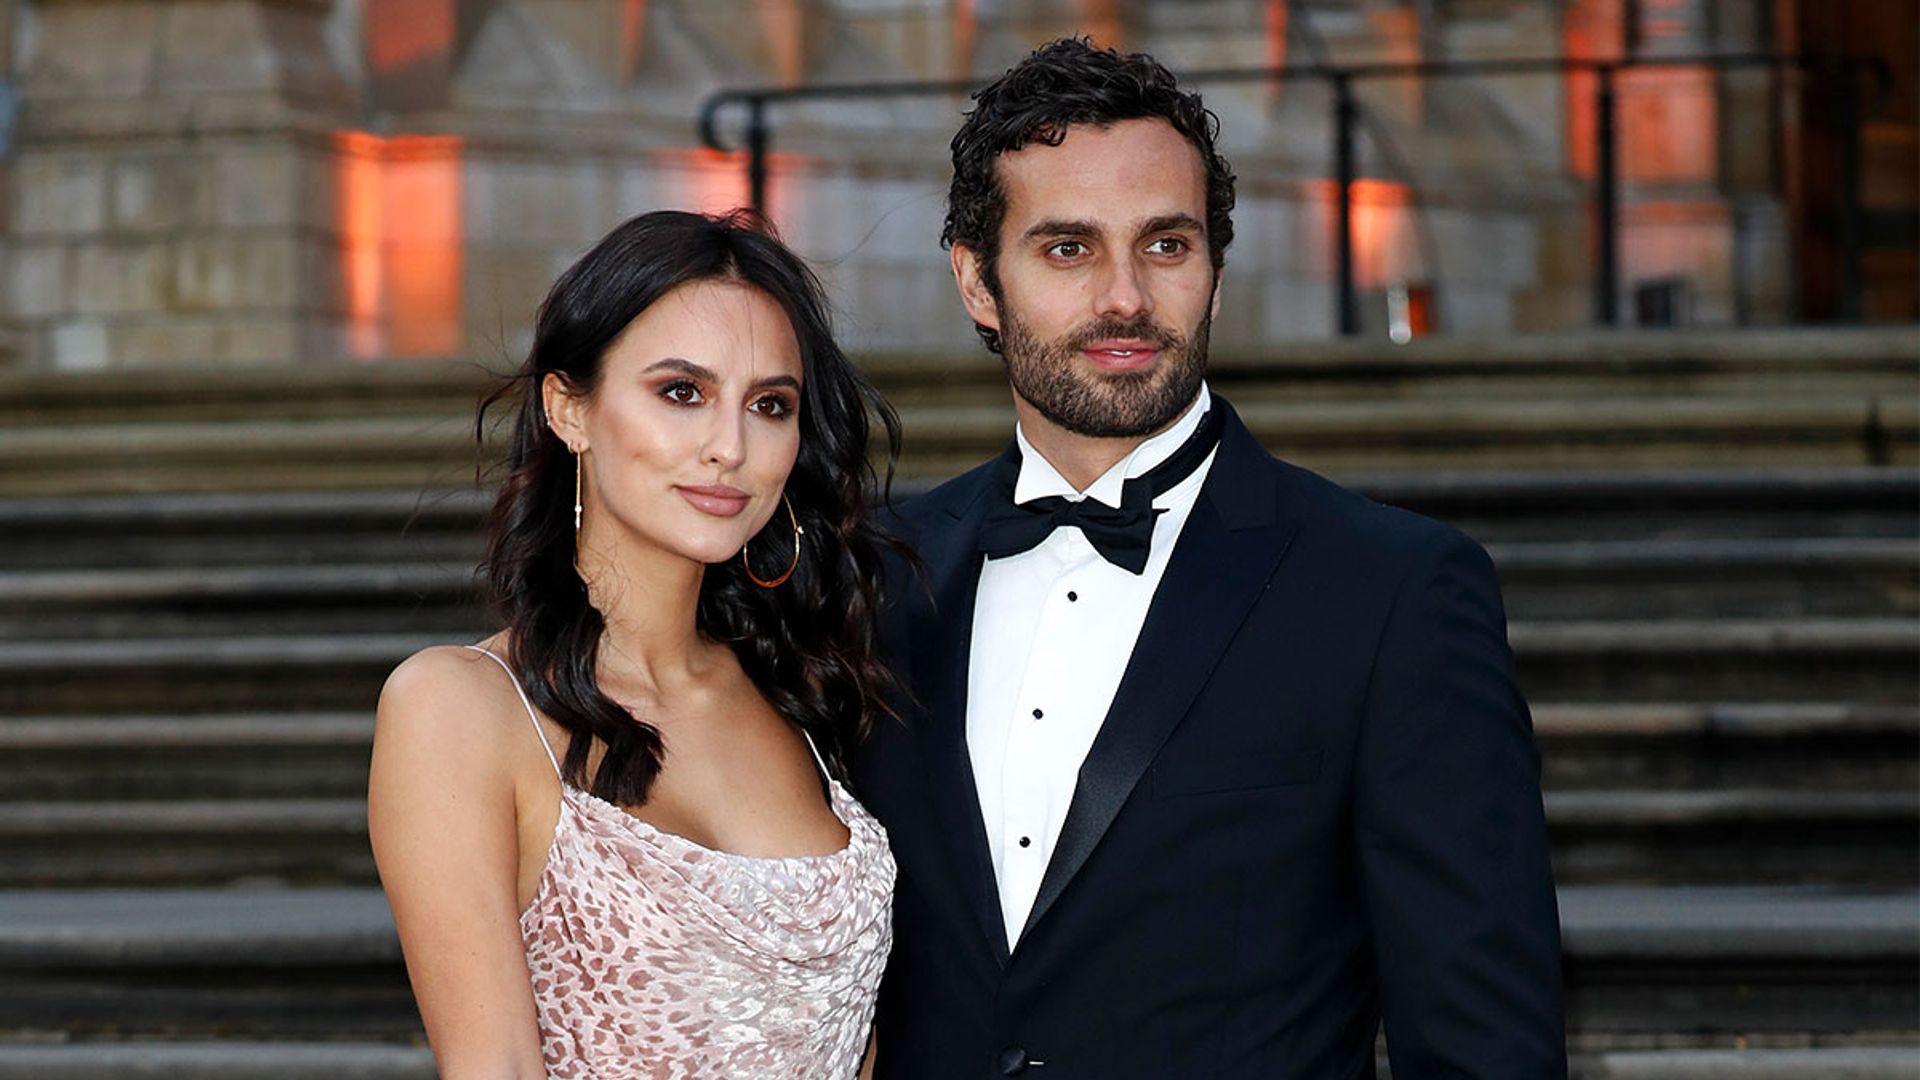 Lucy Watson opens up about secret engagement ring and wedding plans